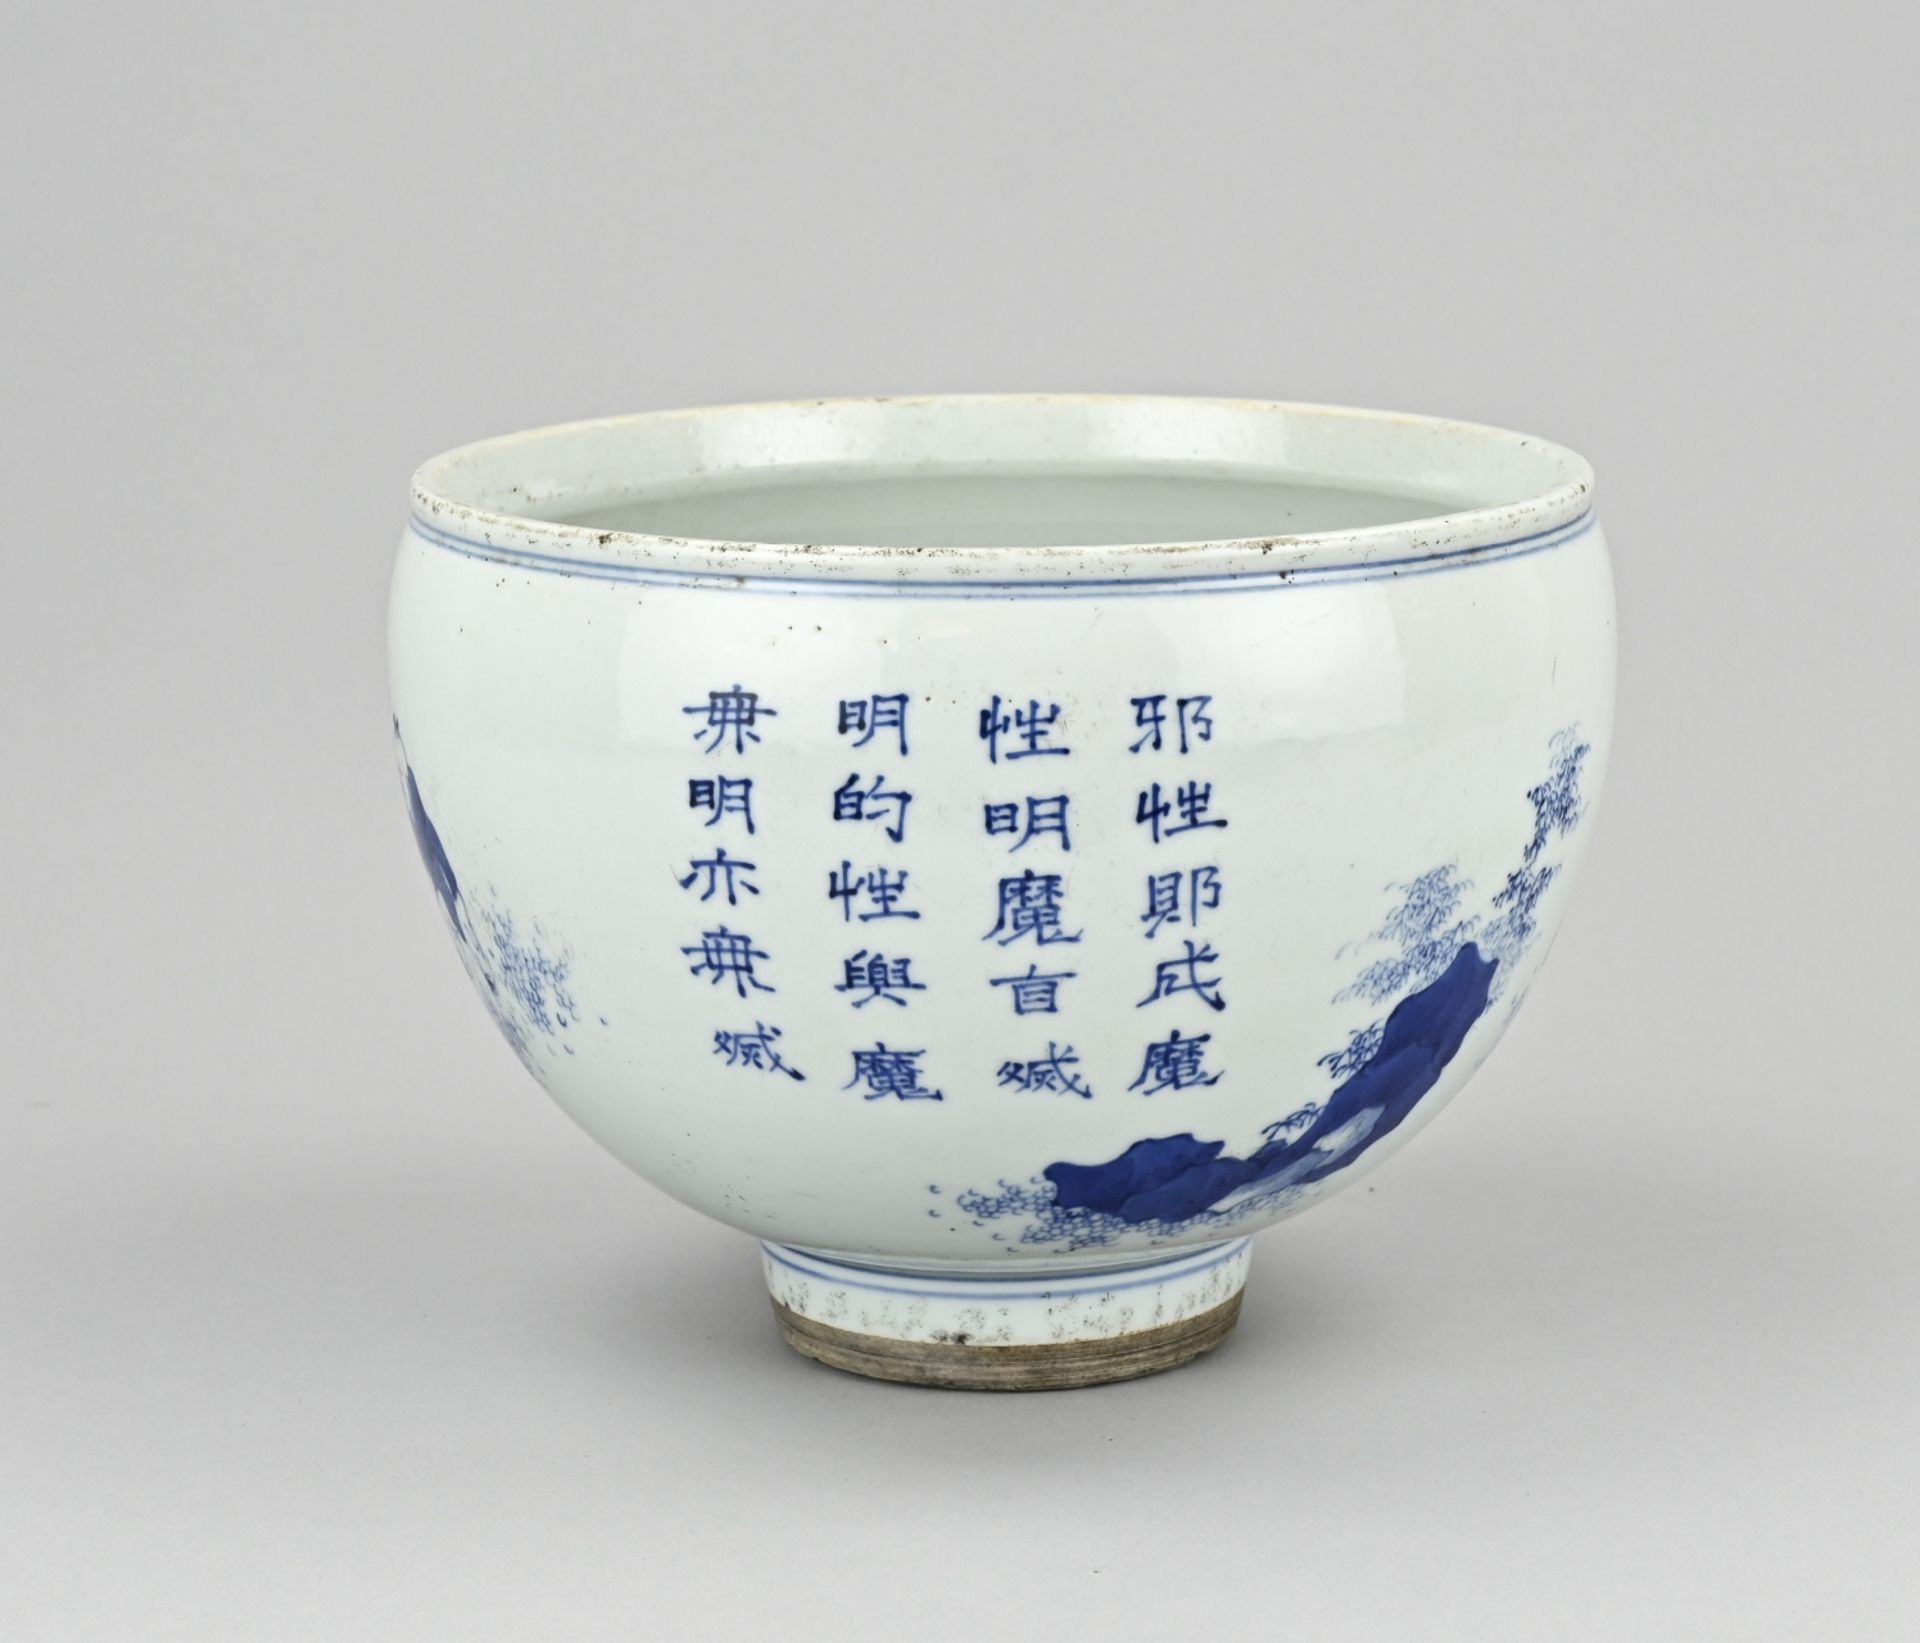 Chinese flower pot - Image 2 of 3